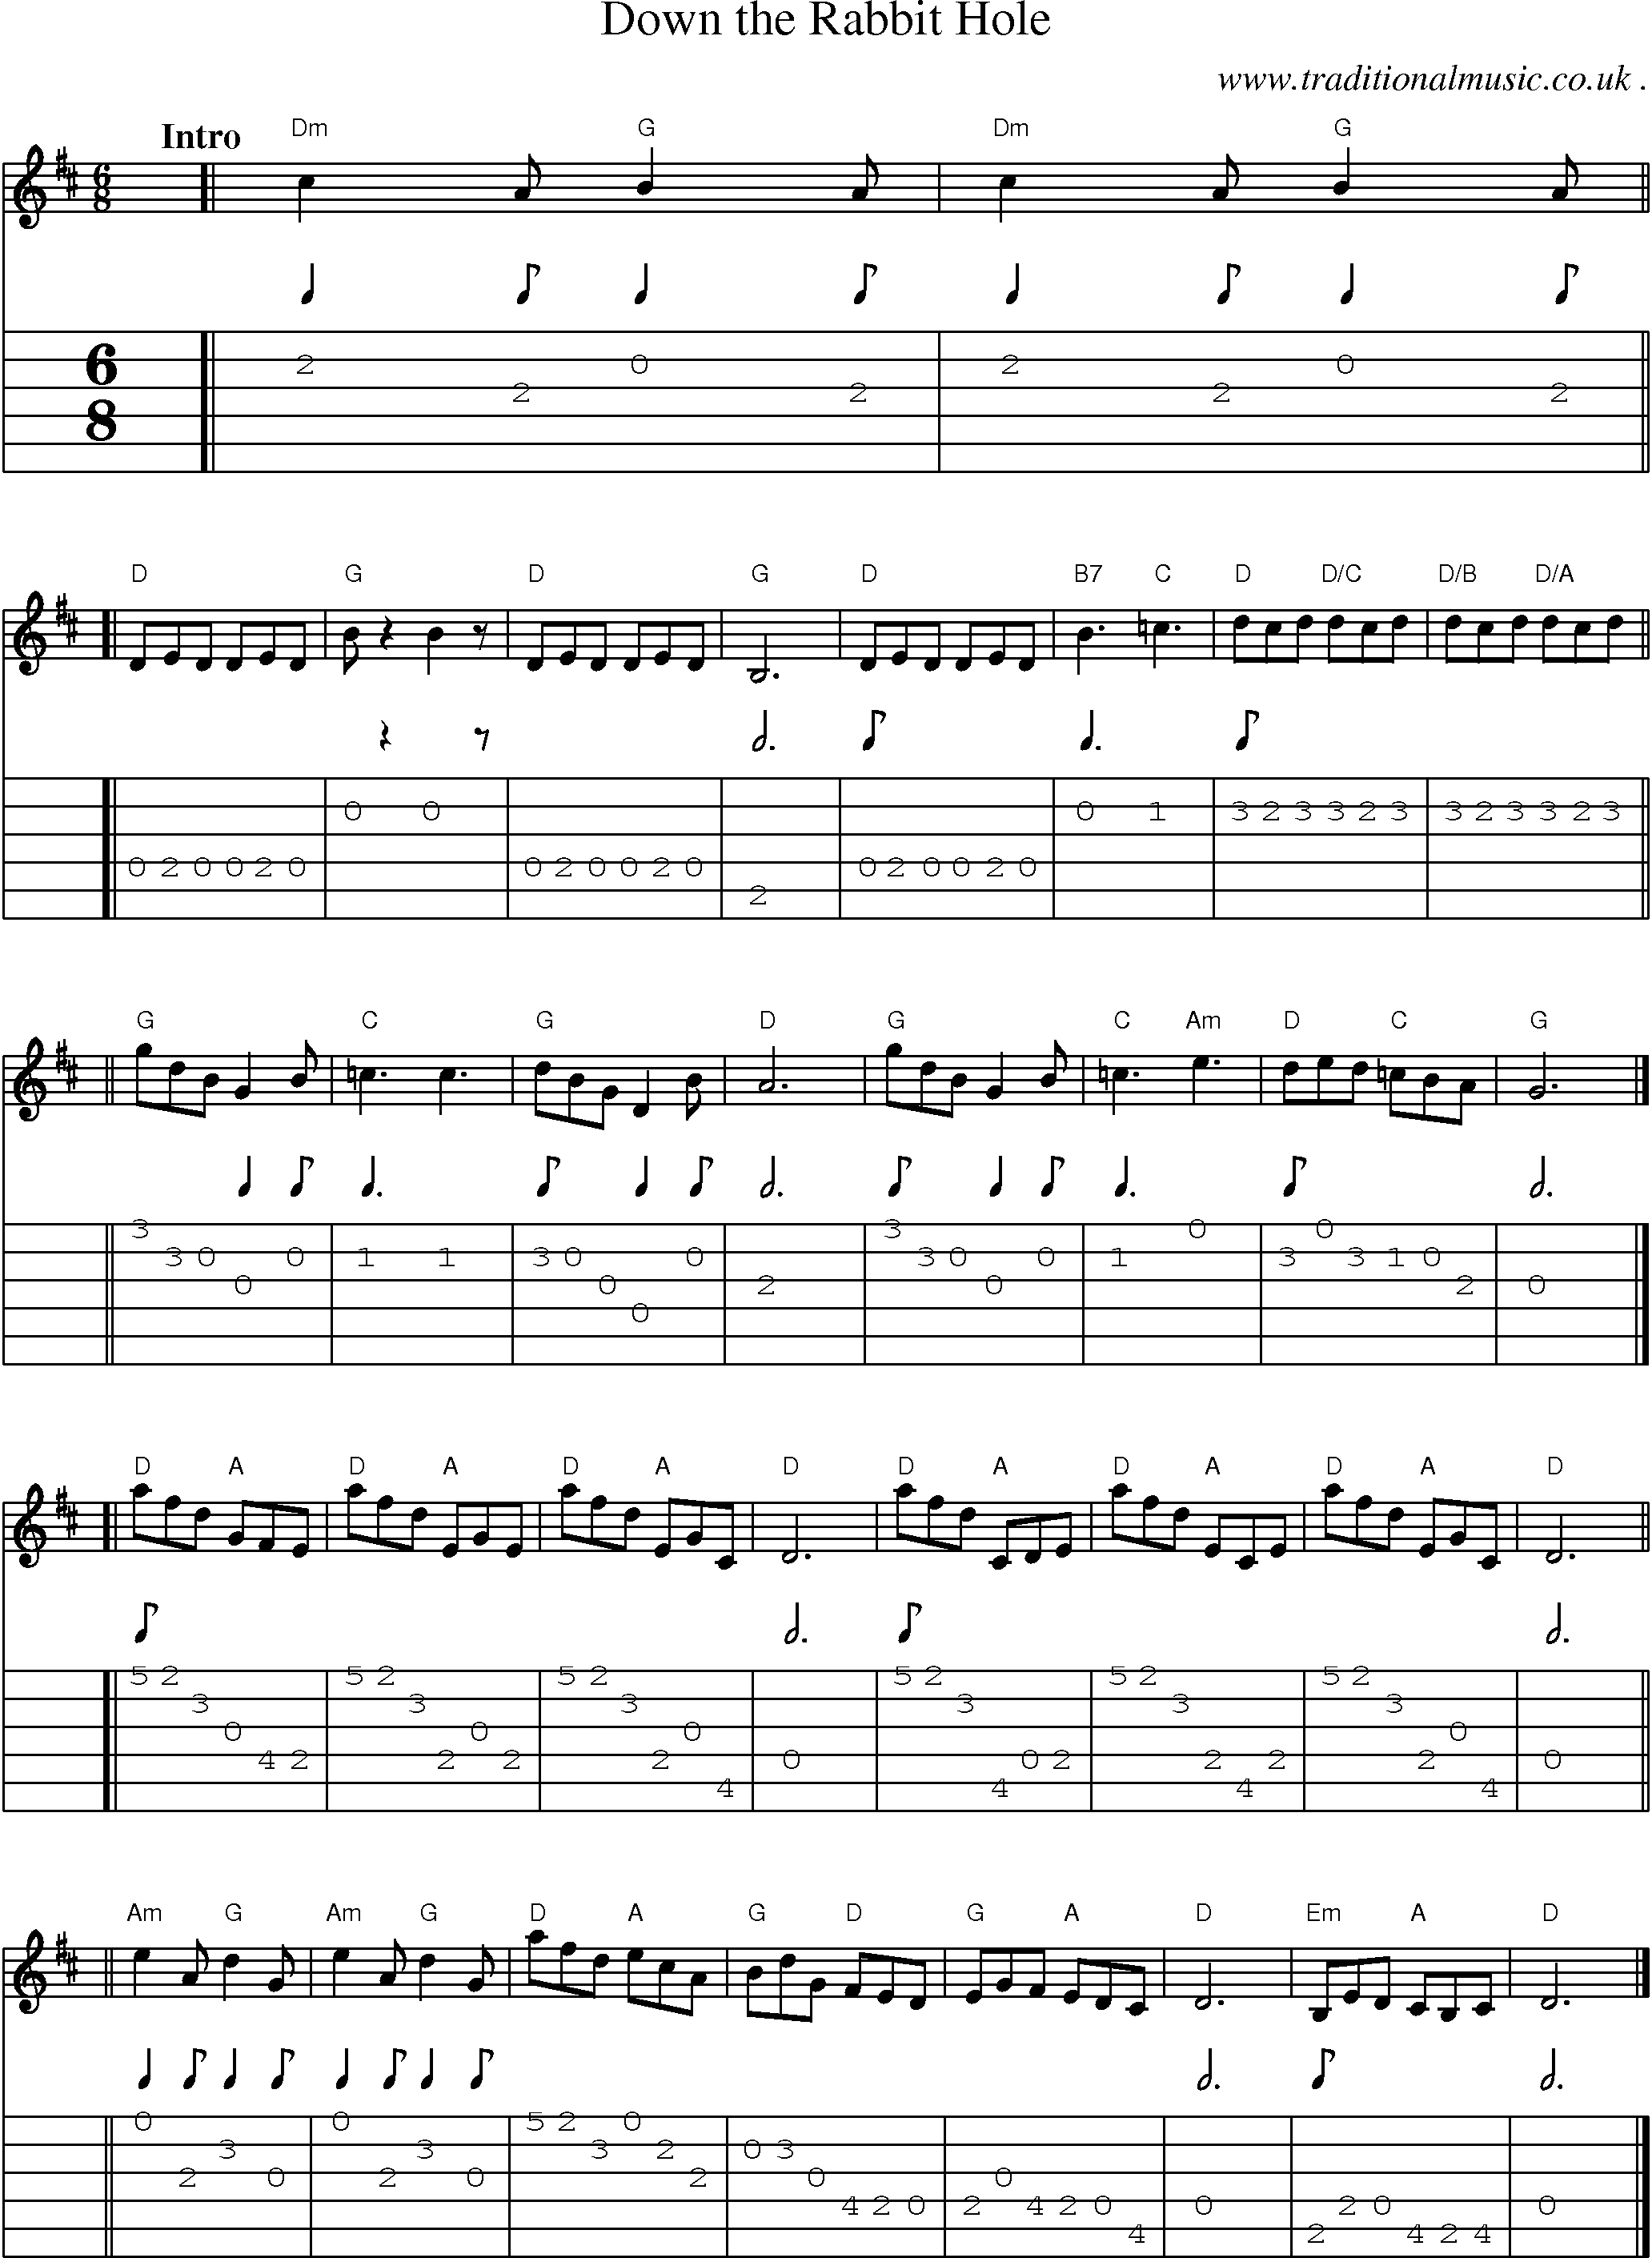 Sheet-music  score, Chords and Guitar Tabs for Down The Rabbit Hole